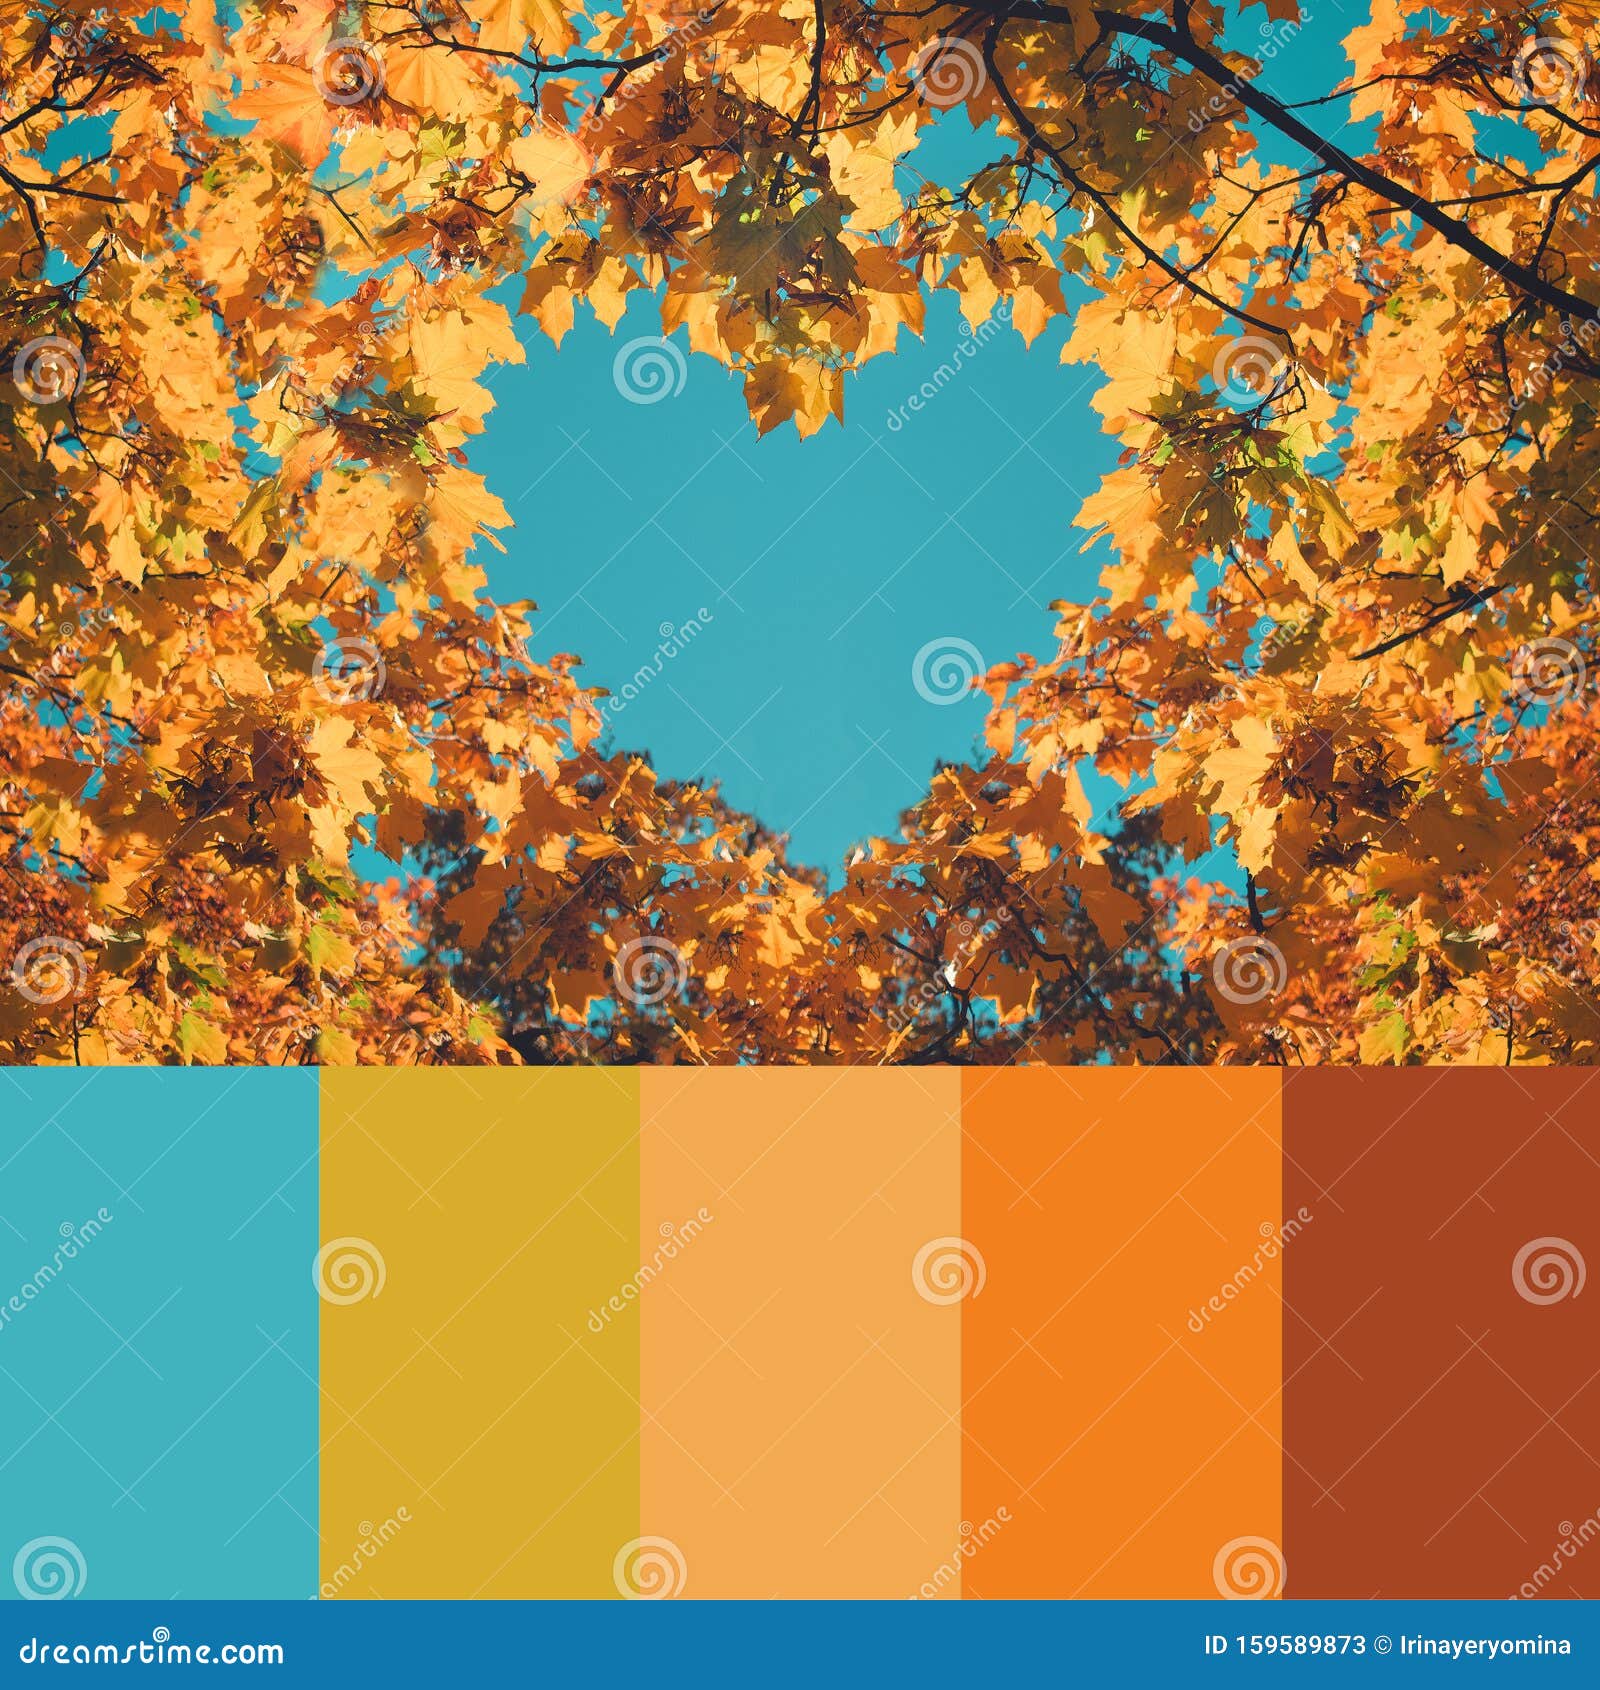 Trend Fall Color Palette With Autumn Leaves And Sky Collage With Natural Autumn Colors Swatch Stock Image Image Of Vintage Collage